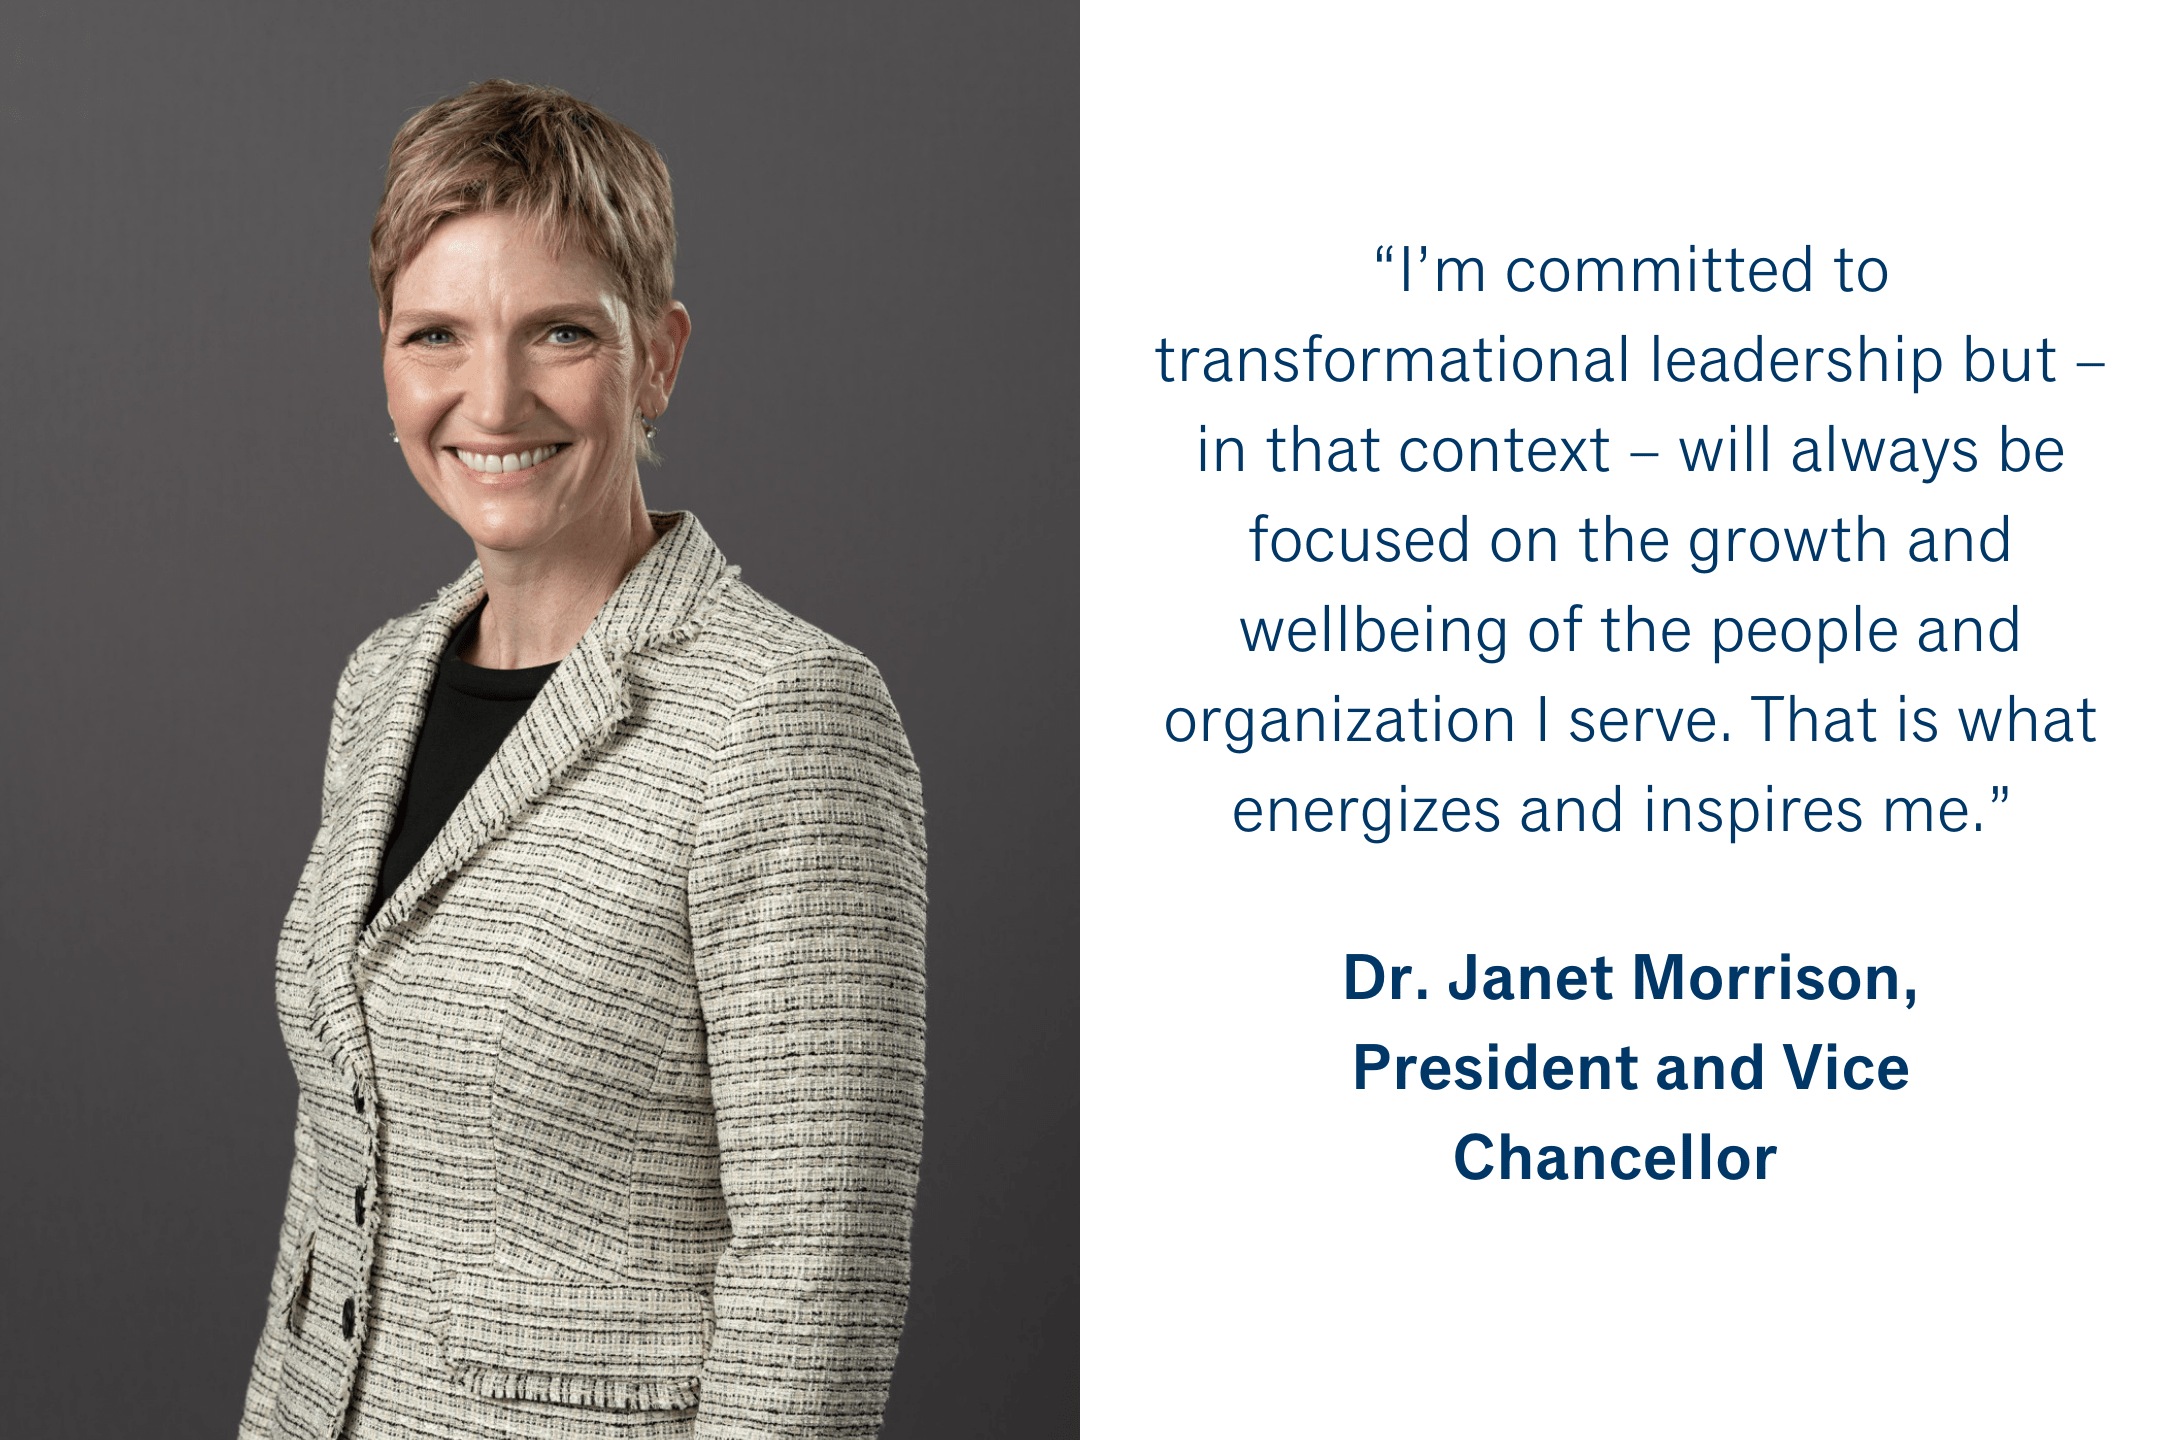 “I’m committed to transformational leadership but – in that context -- will always be focused on the growth and wellbeing of the people and organization I serve. That is what energizes and inspires me.” Dr. Janet Morrison, President and Vice Chancellor 